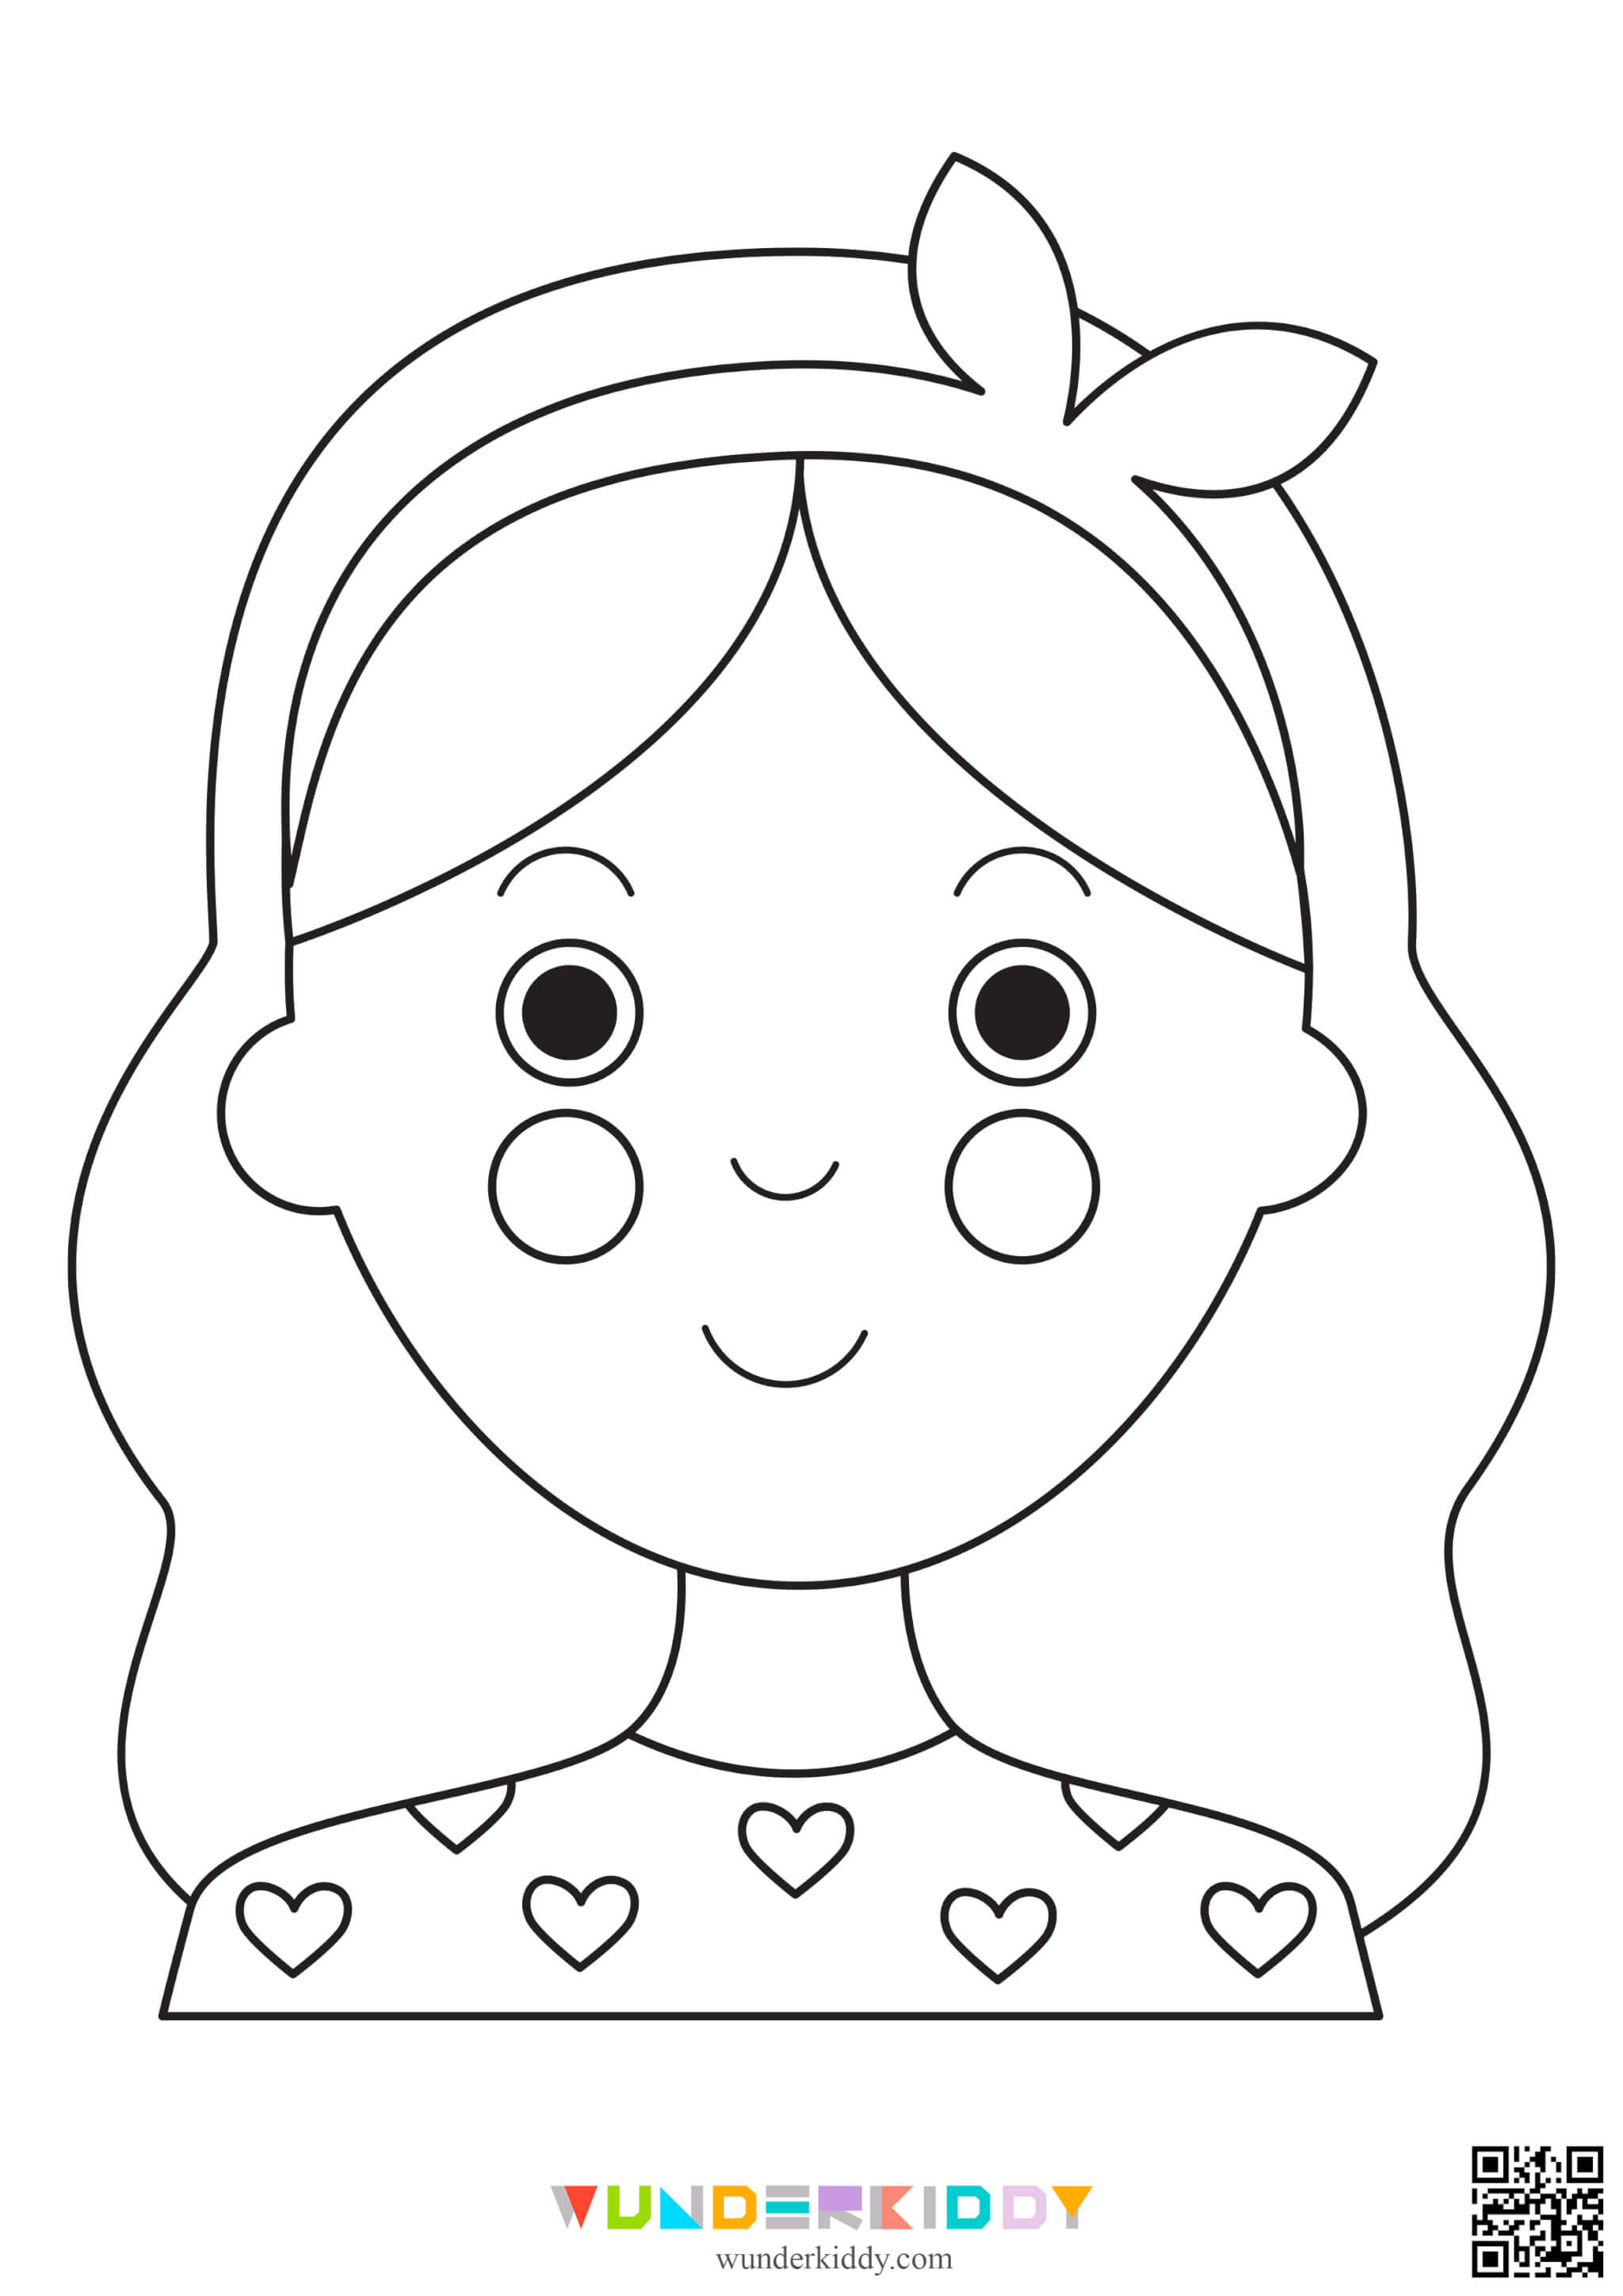 Face Coloring Page - Image 3